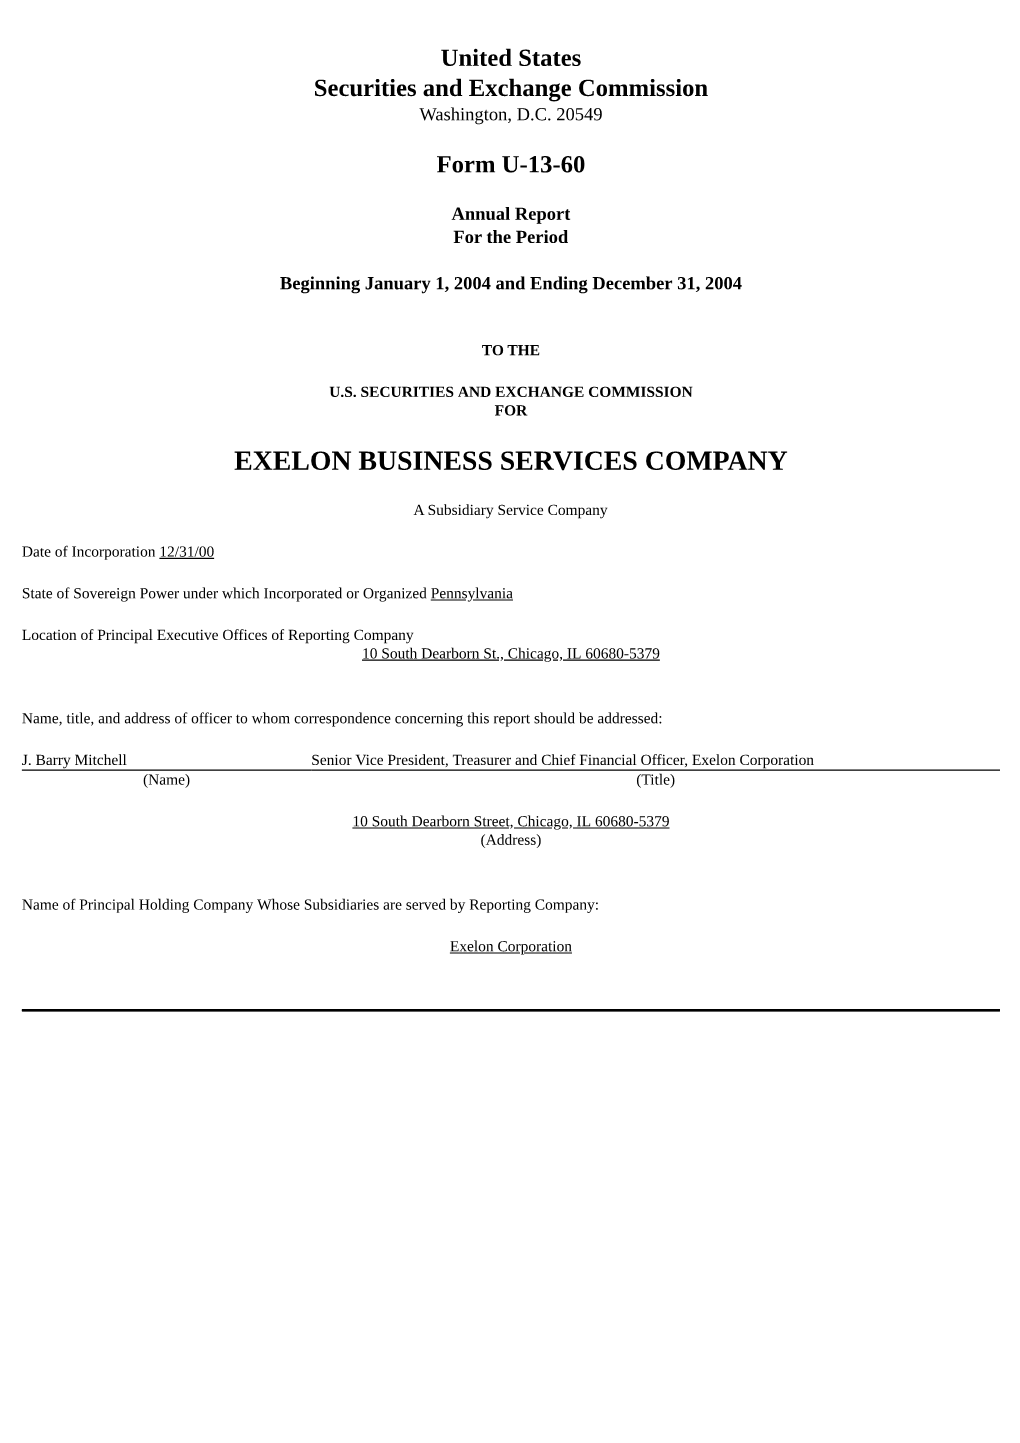 Exelon Business Services Company